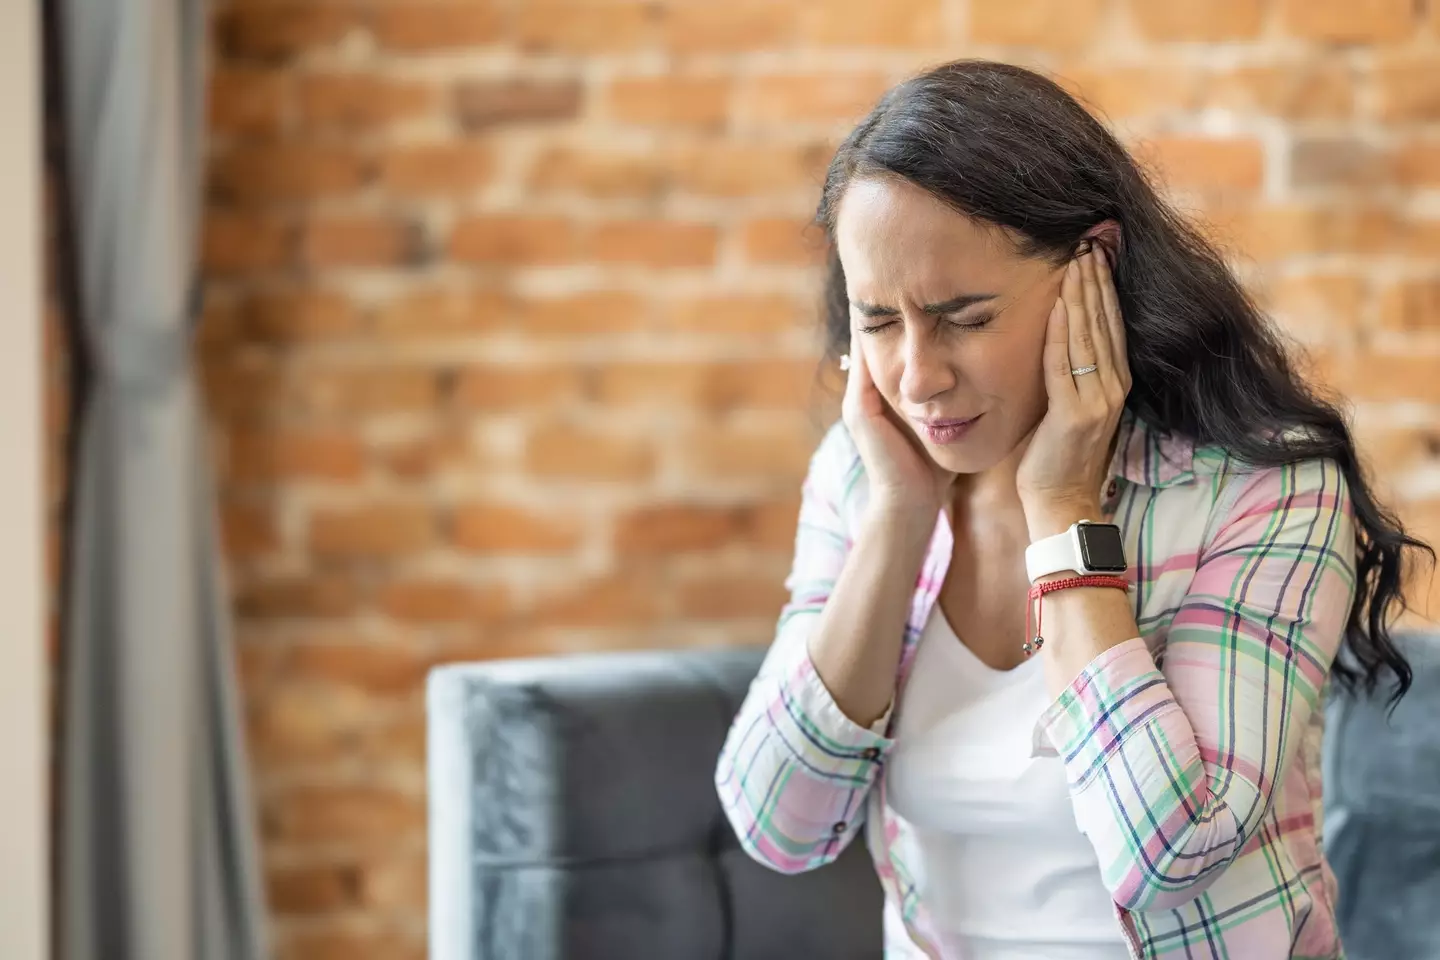 Misophonia is so much more than a feeling of annoyance over certain sounds.